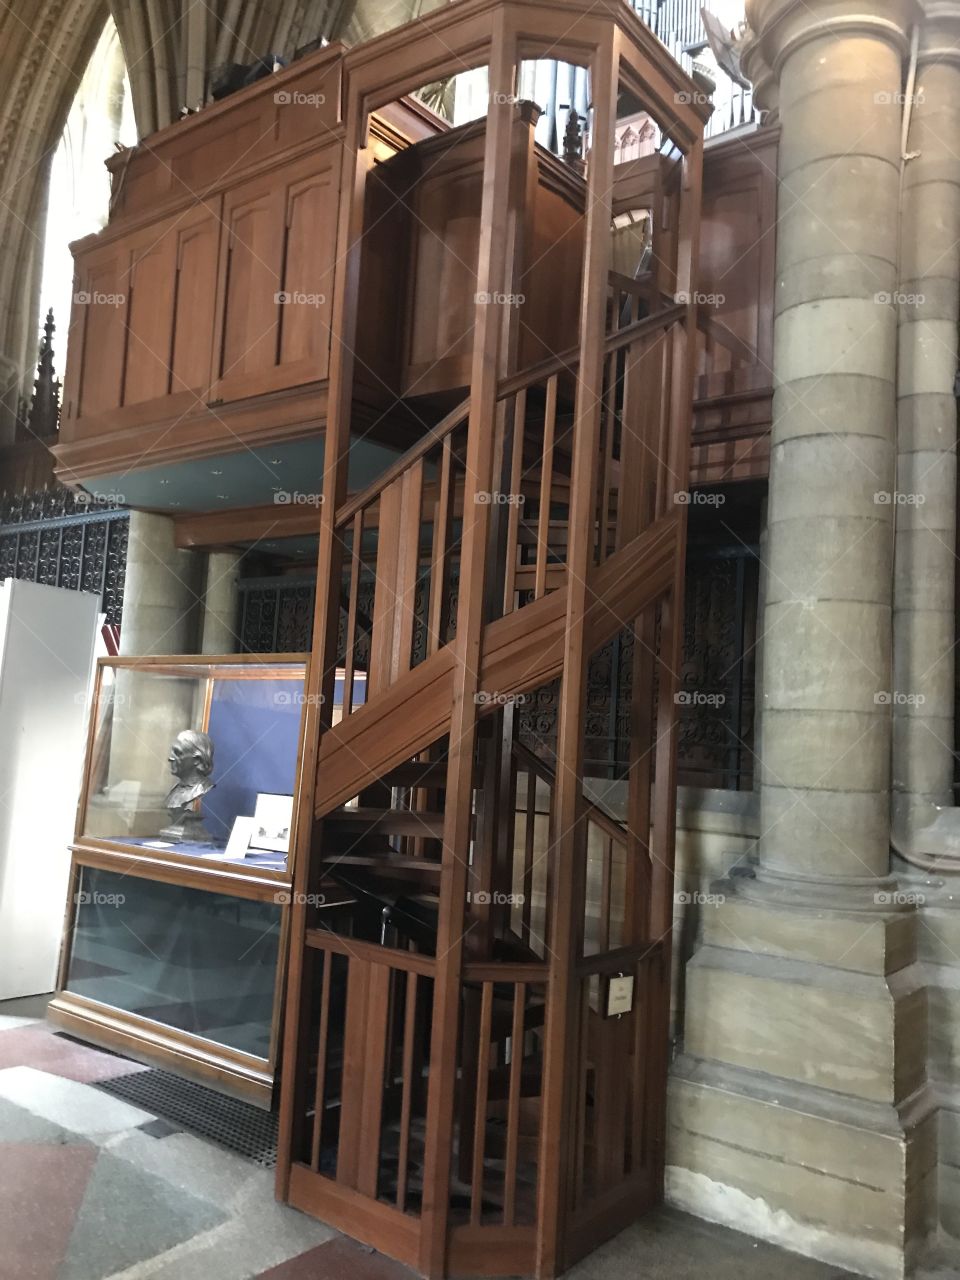 The considerable ascent that the clergy of Truro Cathedral take to their pulpit, who could fail not to be impressed.